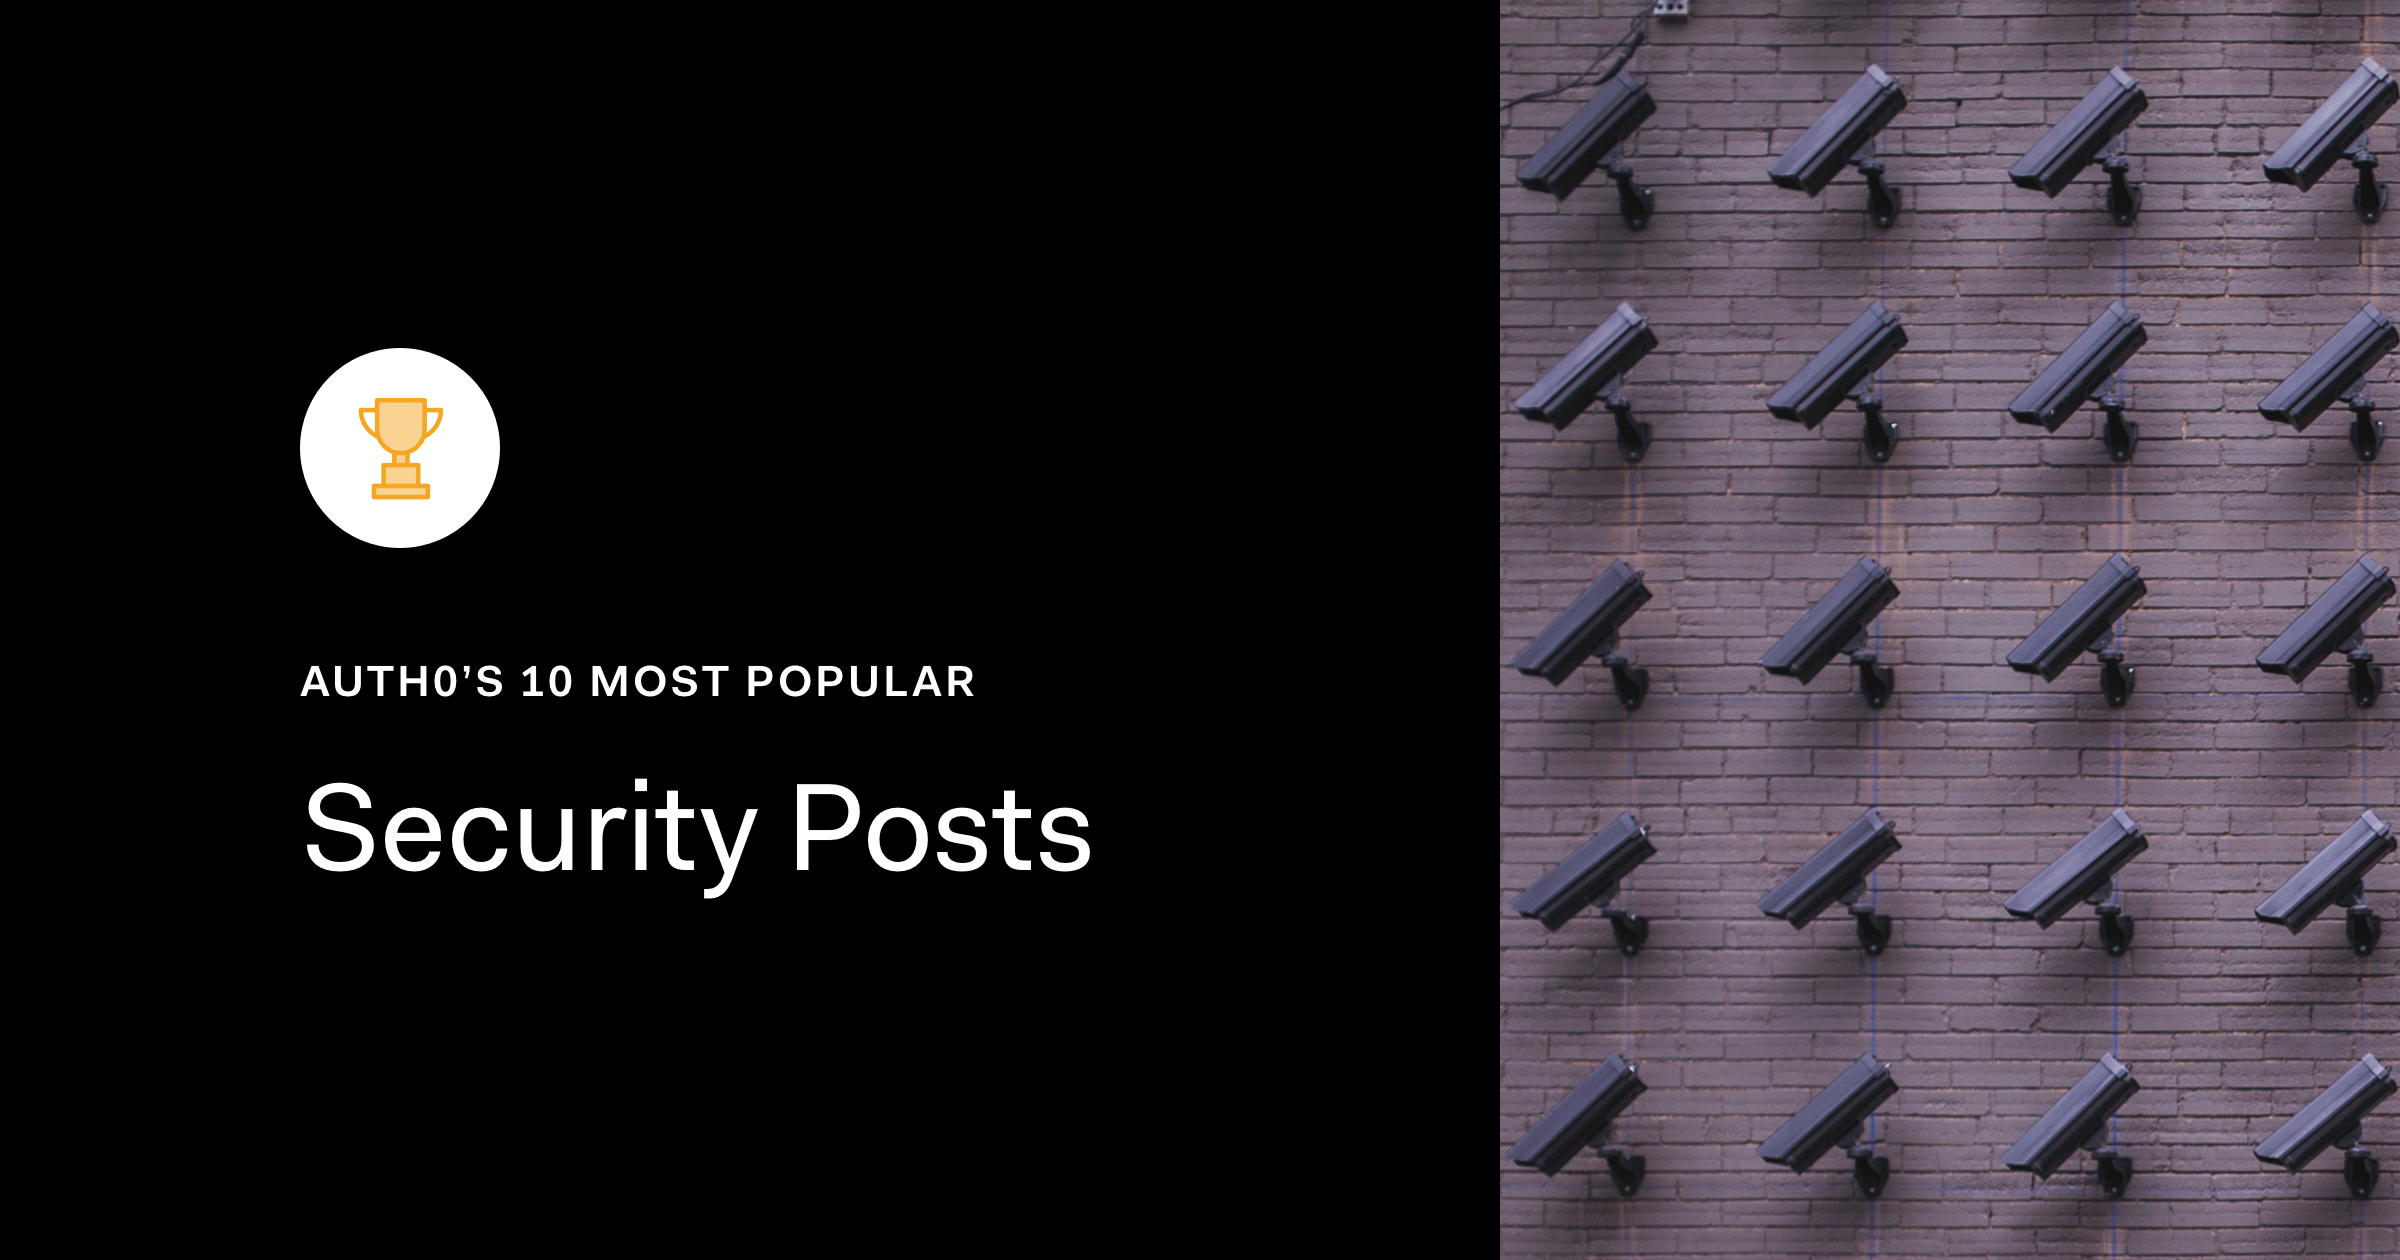 Auth0's 10 Most-Popular Security Posts